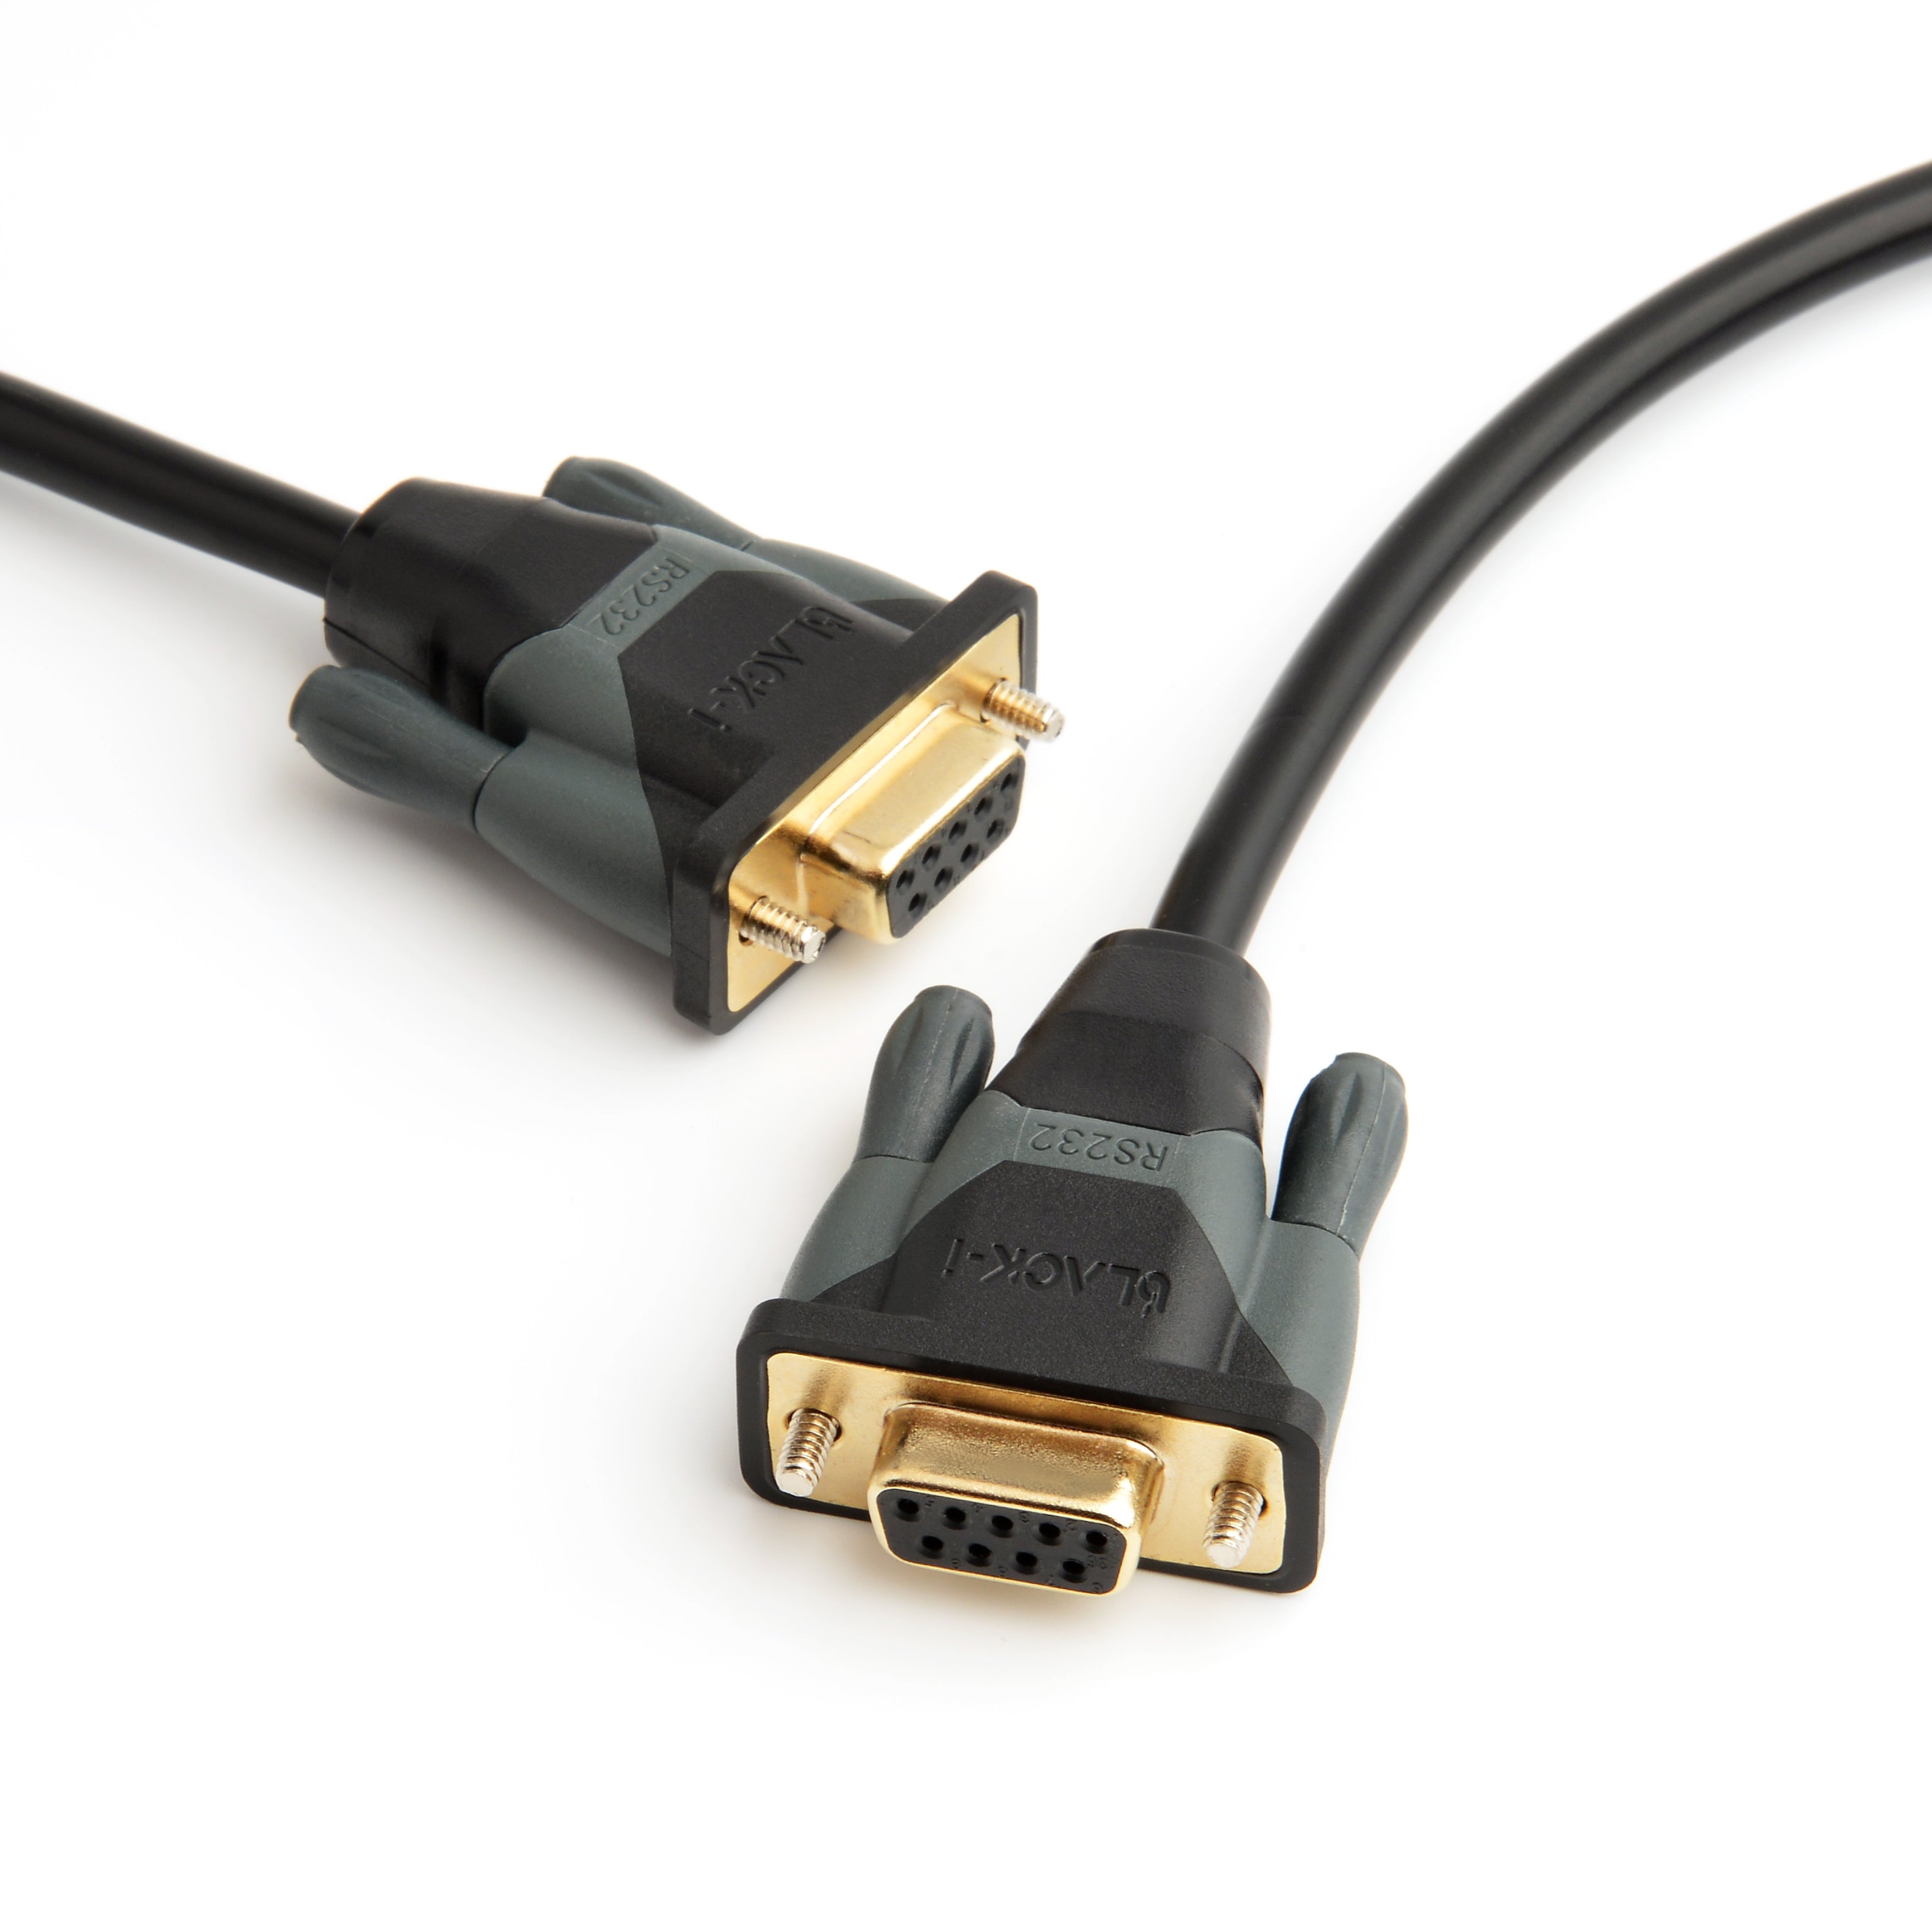 Black-i 9 Pin Serial RS232 Female to Female Cross 1.8M Cable